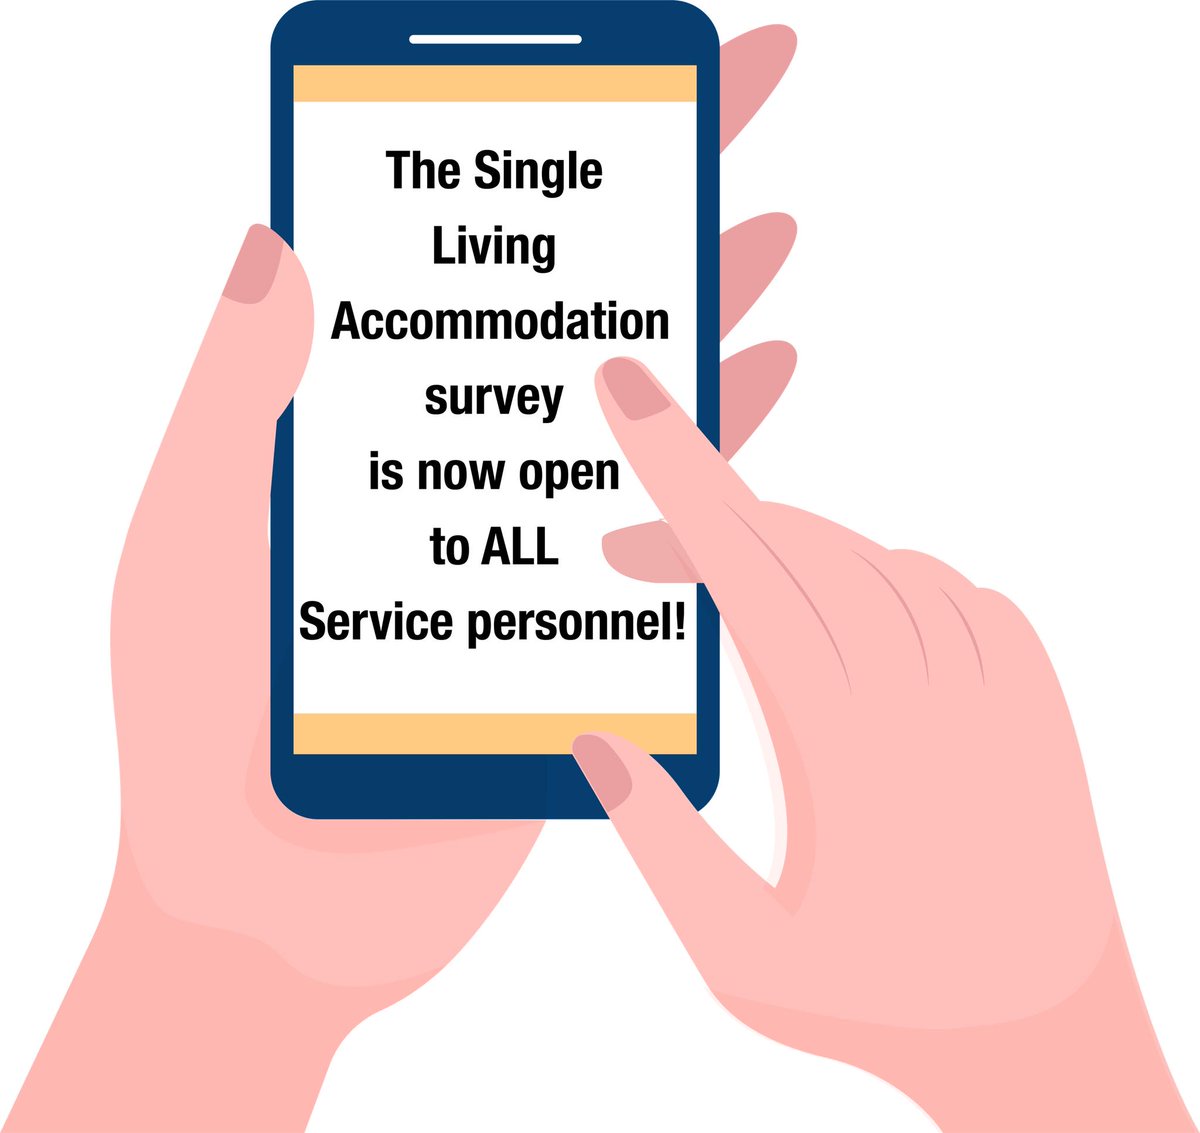 Defence Accommodation Policy - We need to hear from you! The Single Living Accommodation survey is now open to all Service personnel. Share your views and help shape the future of Single Living Accommodation. ow.ly/E2rl50RtZTC @RAFHIVE @Defence Accommodation Policy